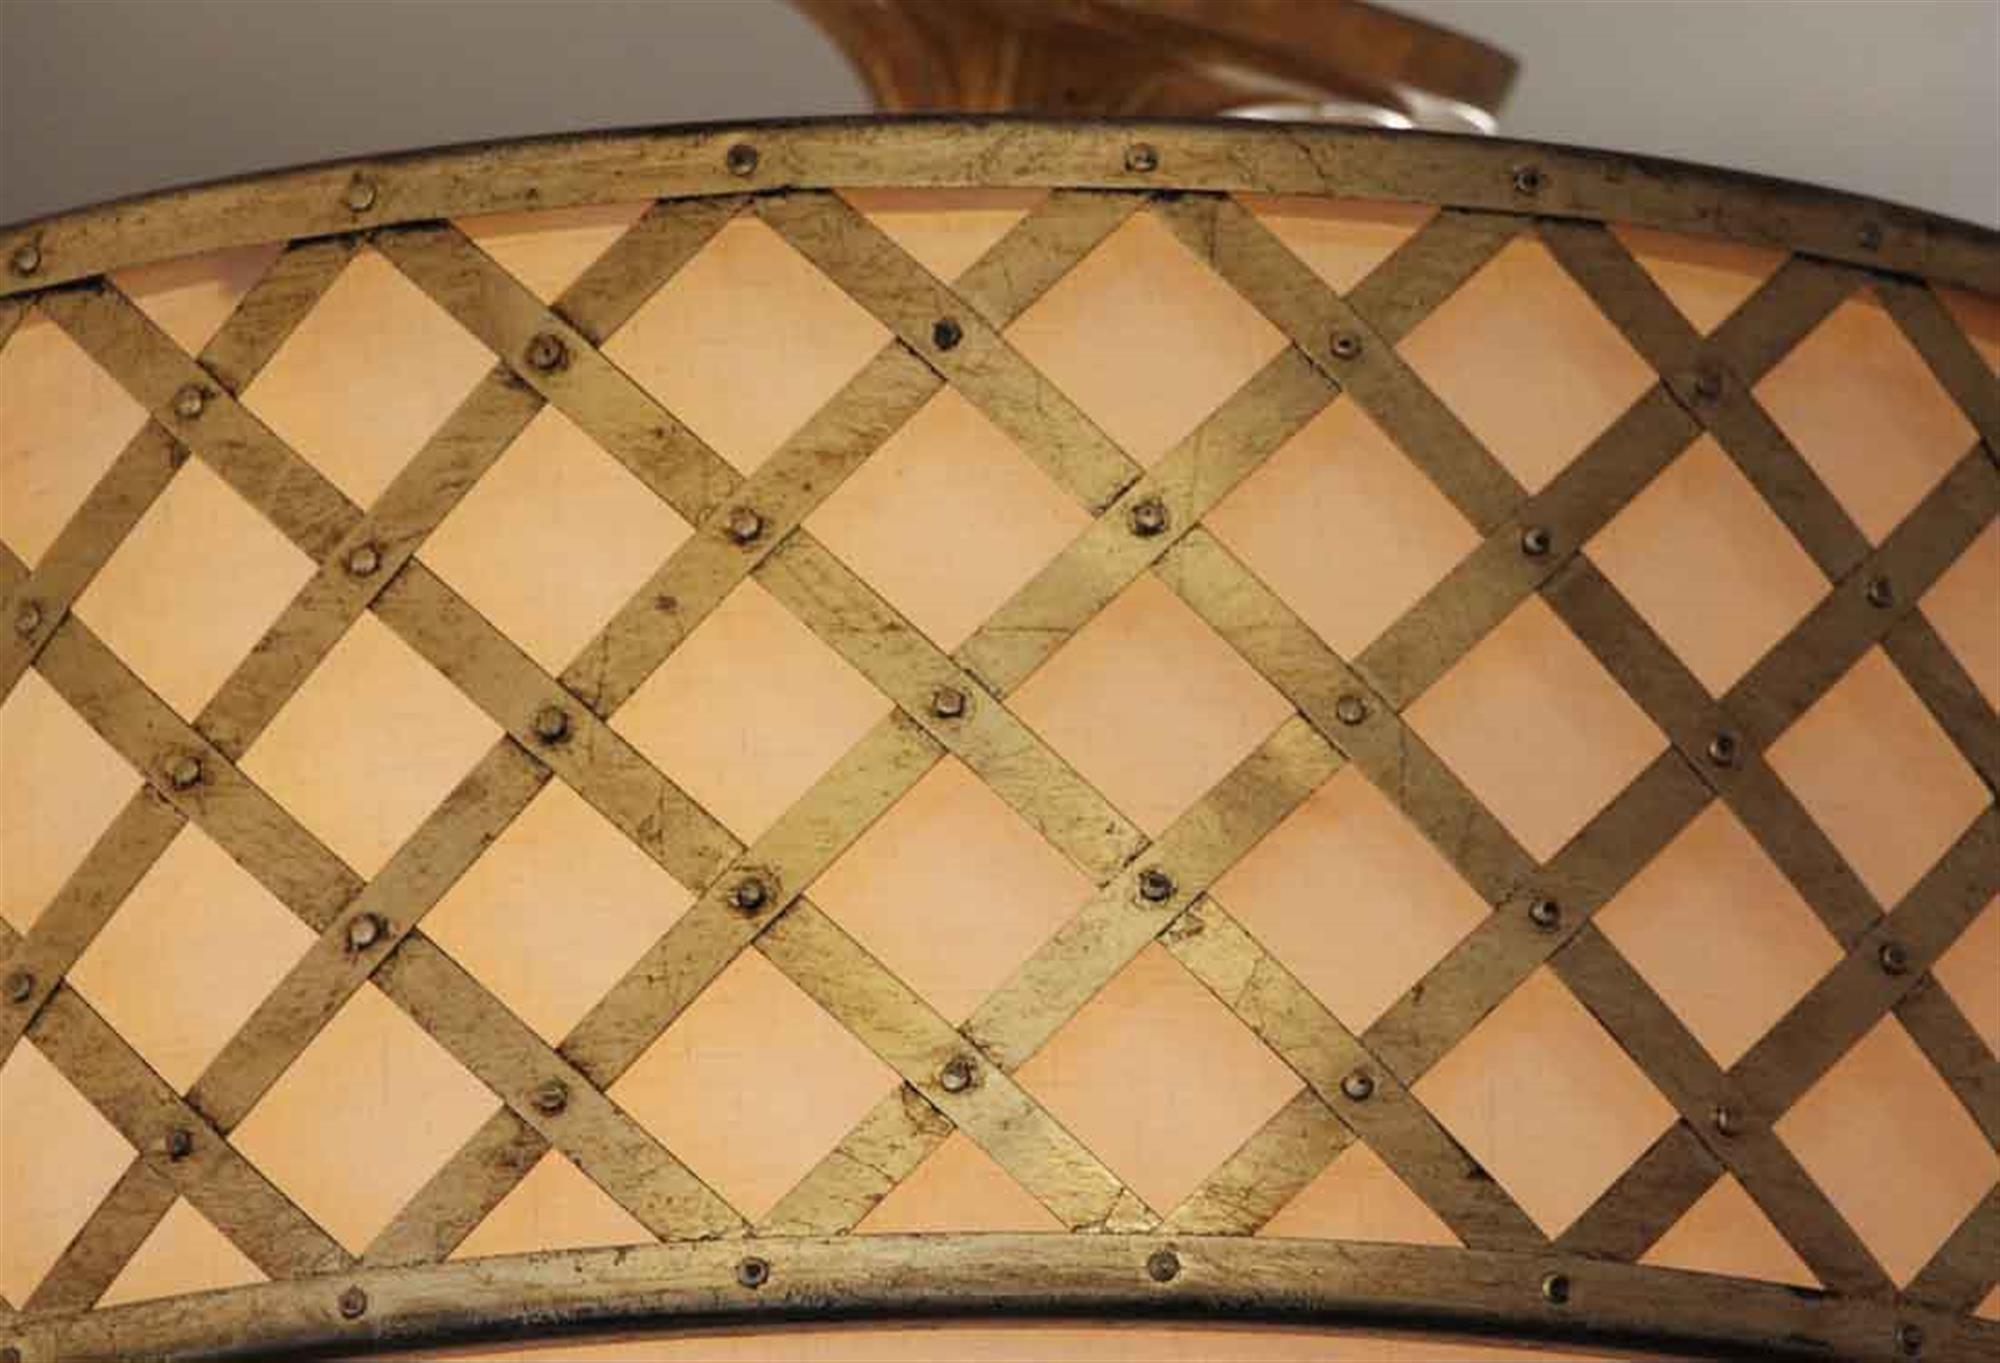 Brass lattice design hanging light with silk shade. This light was once in the Elizabeth Taylor Suite in the Waldorf Astoria Hotel after the hotel underwent renovation in the 1980s. Price includes wiring and cleaning. Please allow 1-2 weeks to